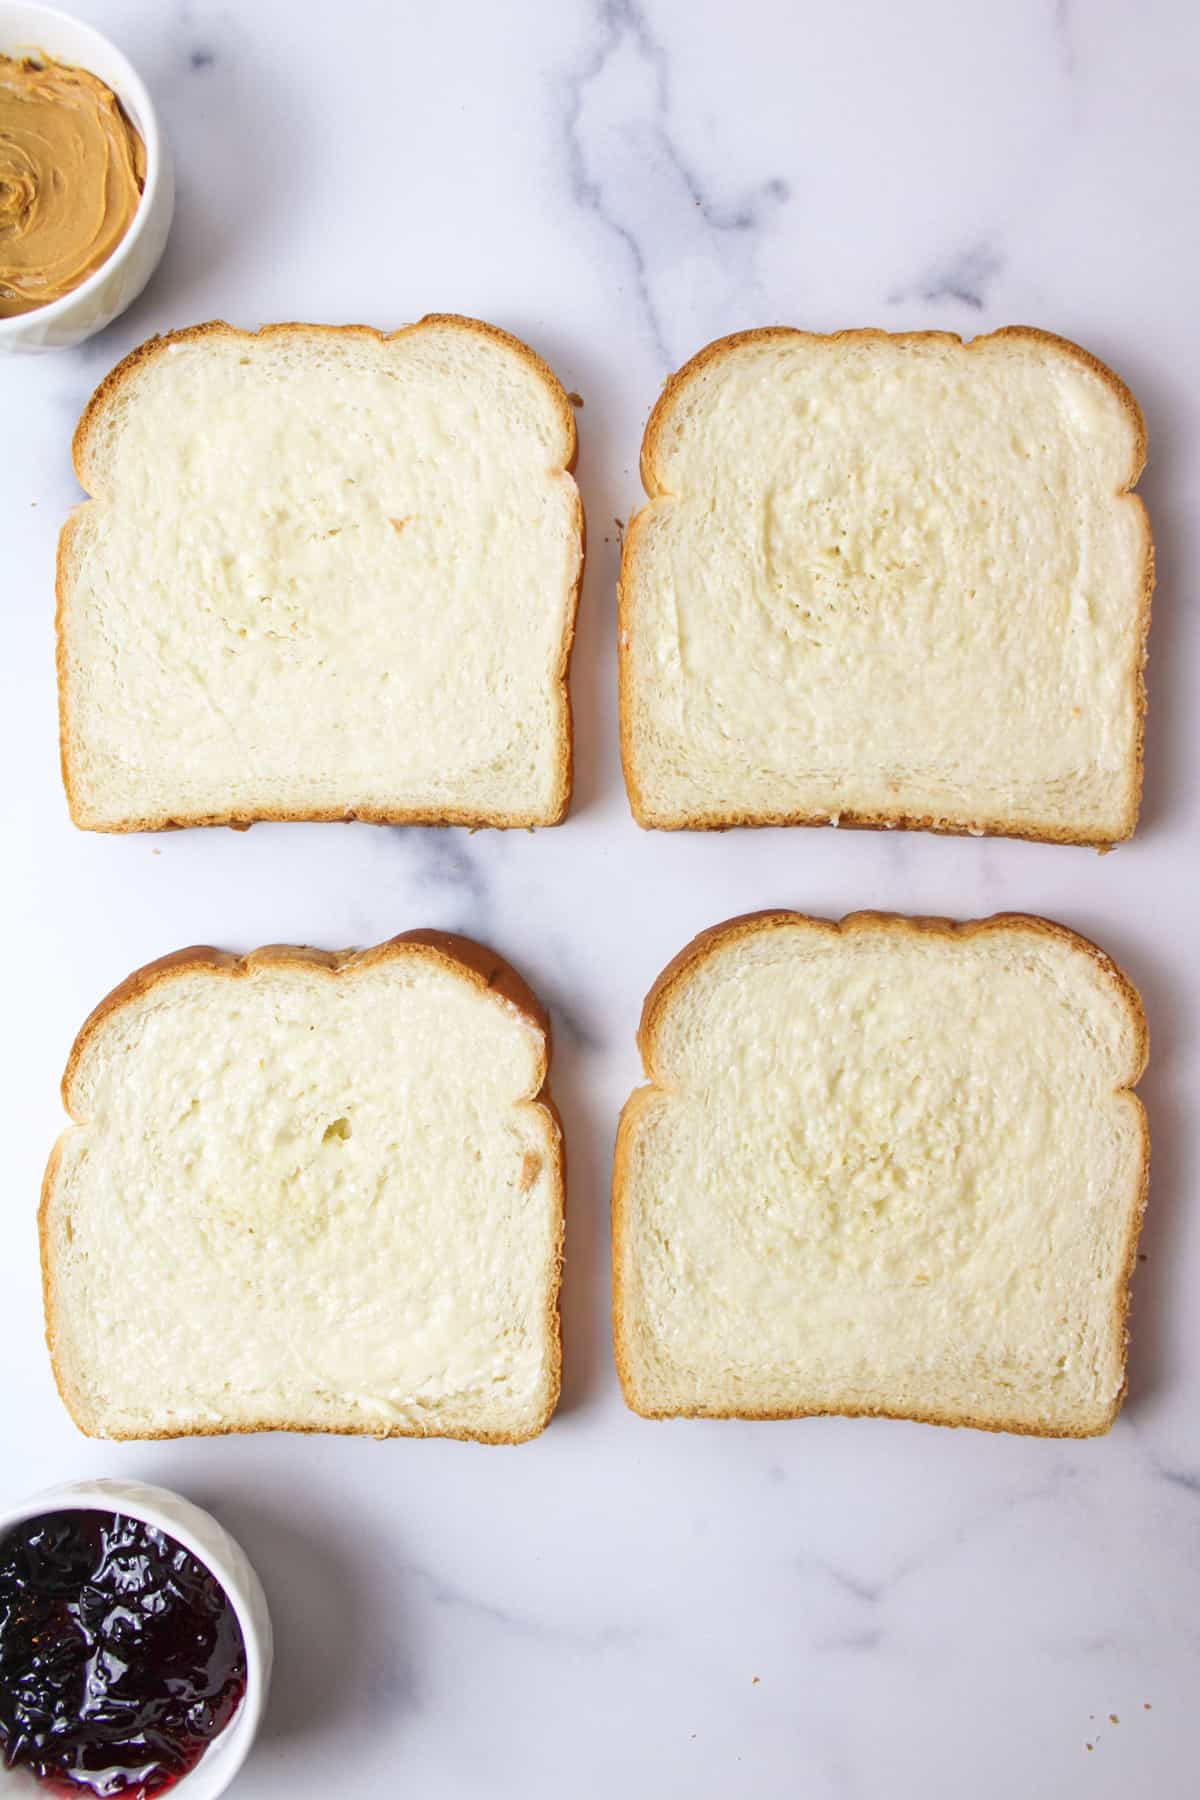 buttered bread slices